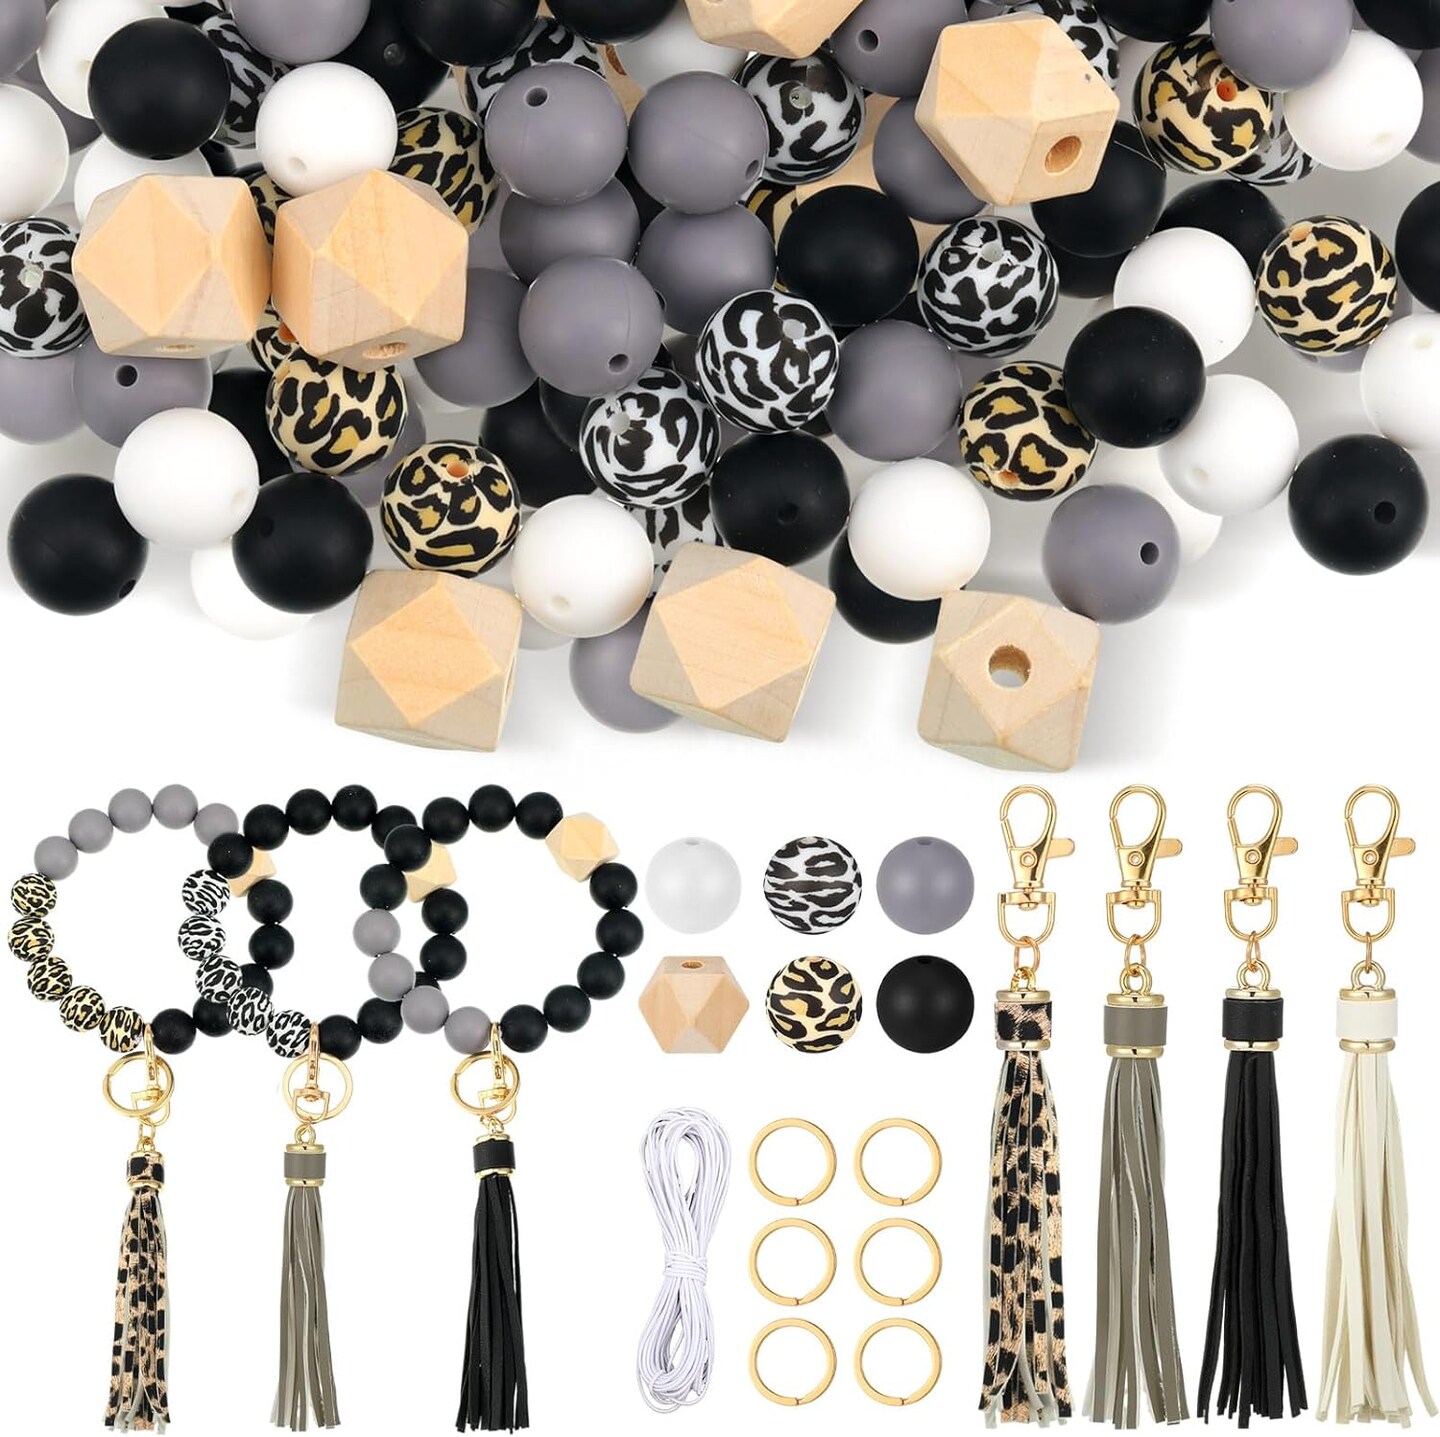  15mm Silicone Beads for Keychain Bracelet Beads